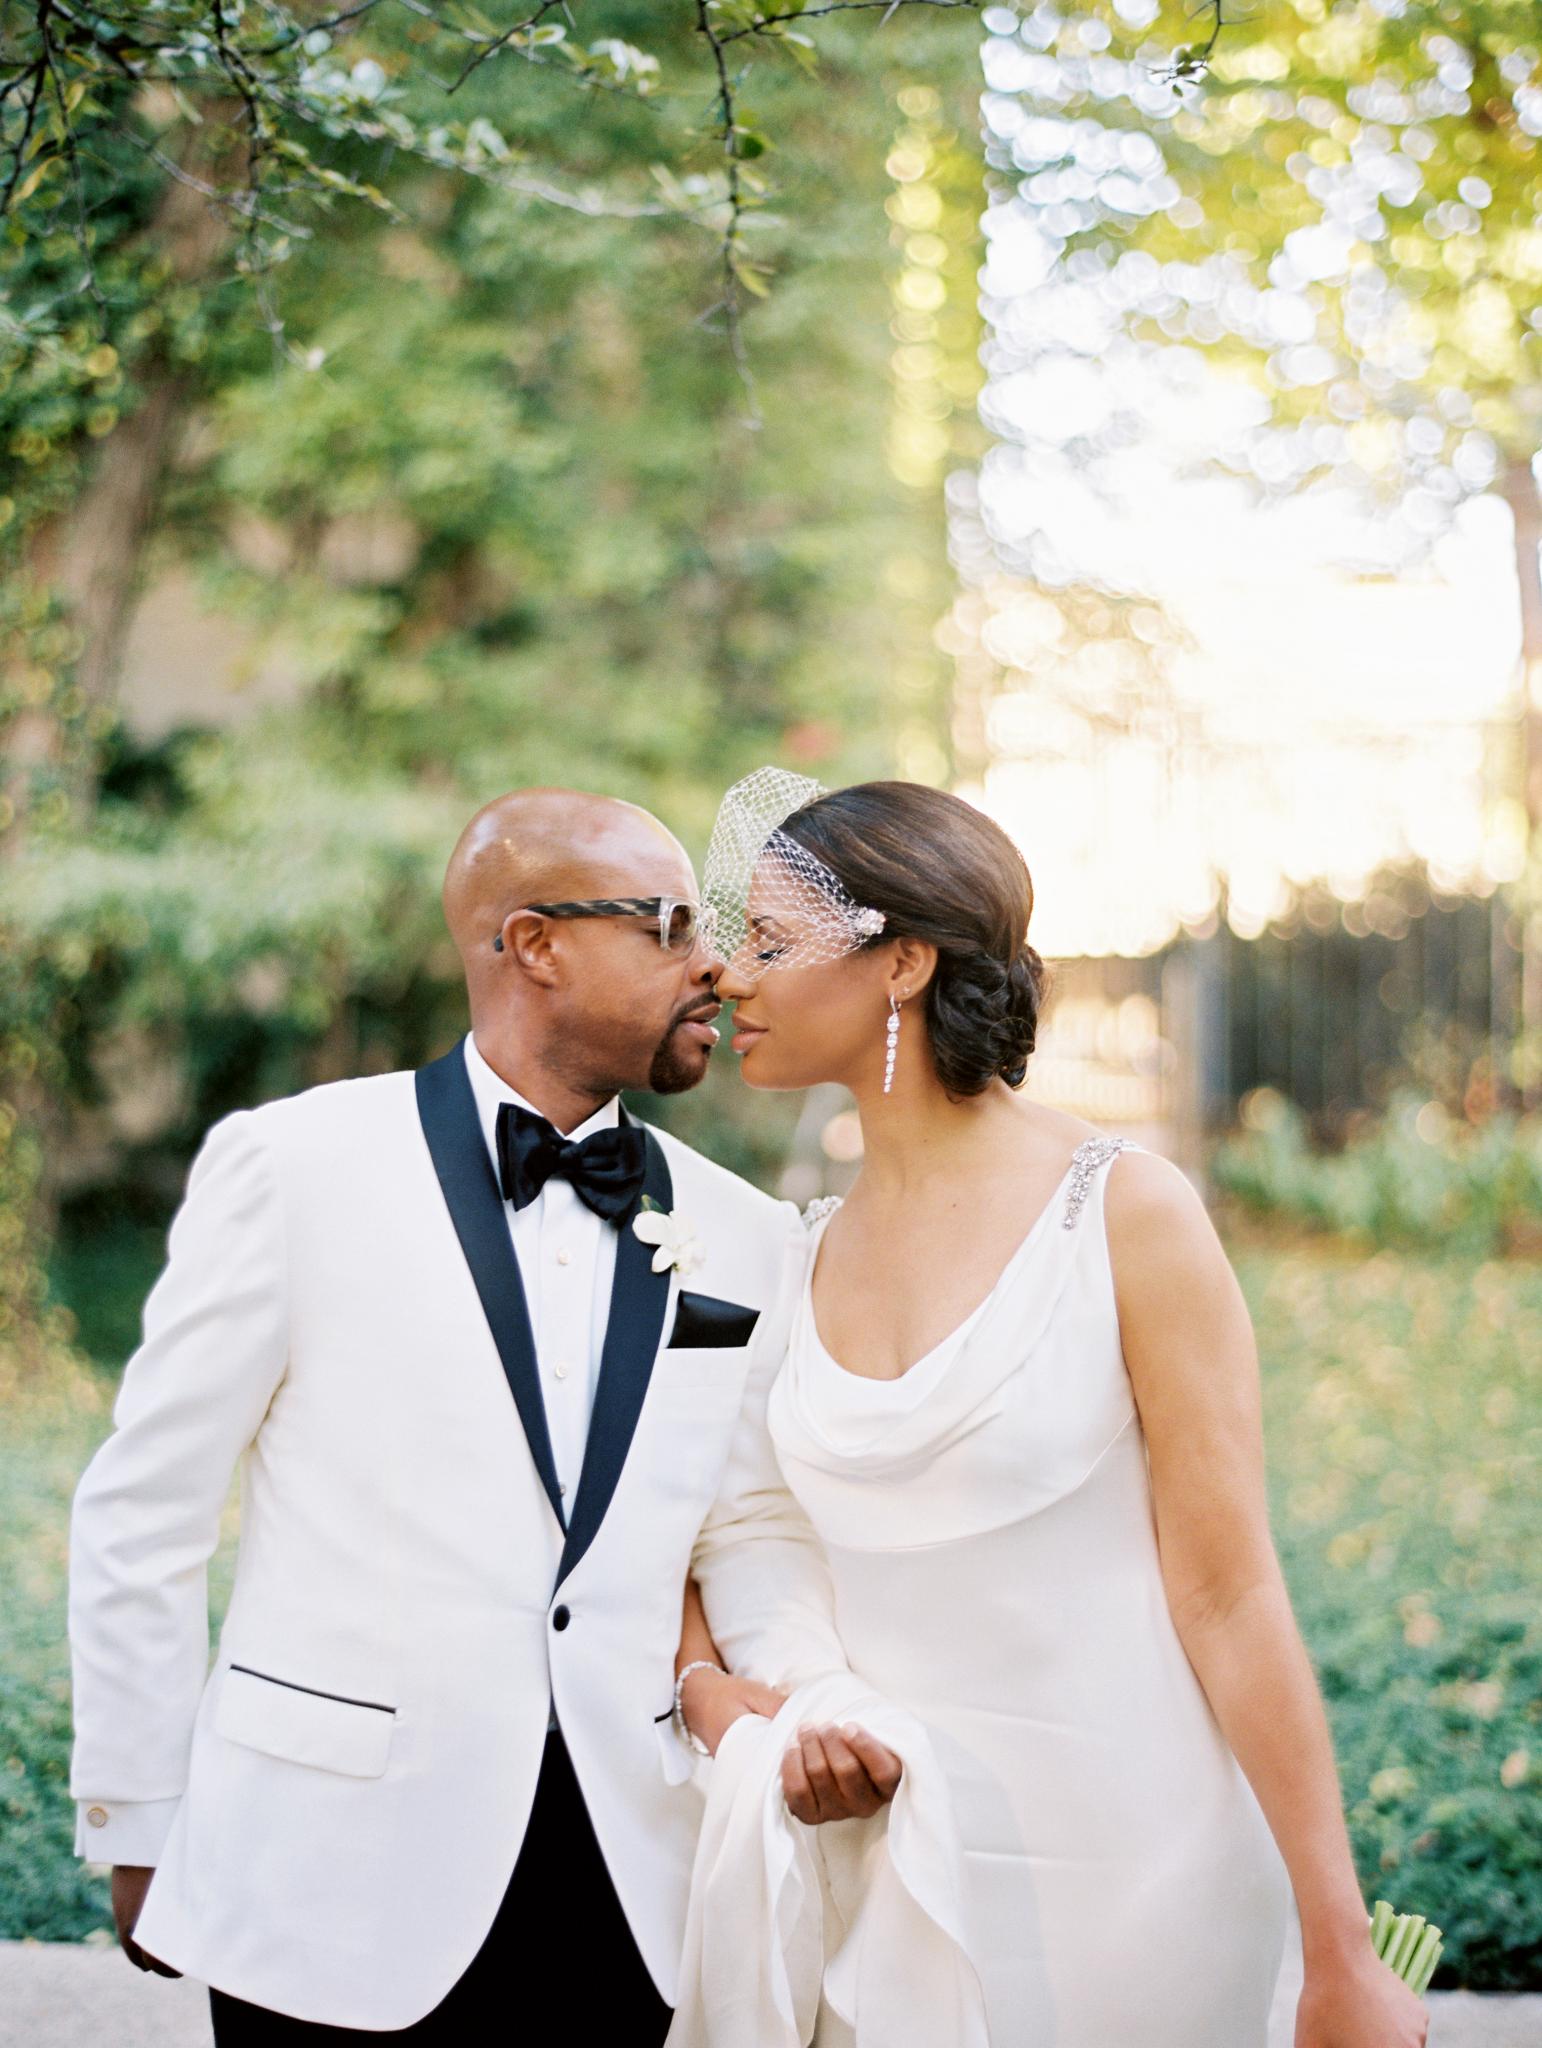 Bridal Bliss: Darilyn and Terrance’s Chicago Wedding